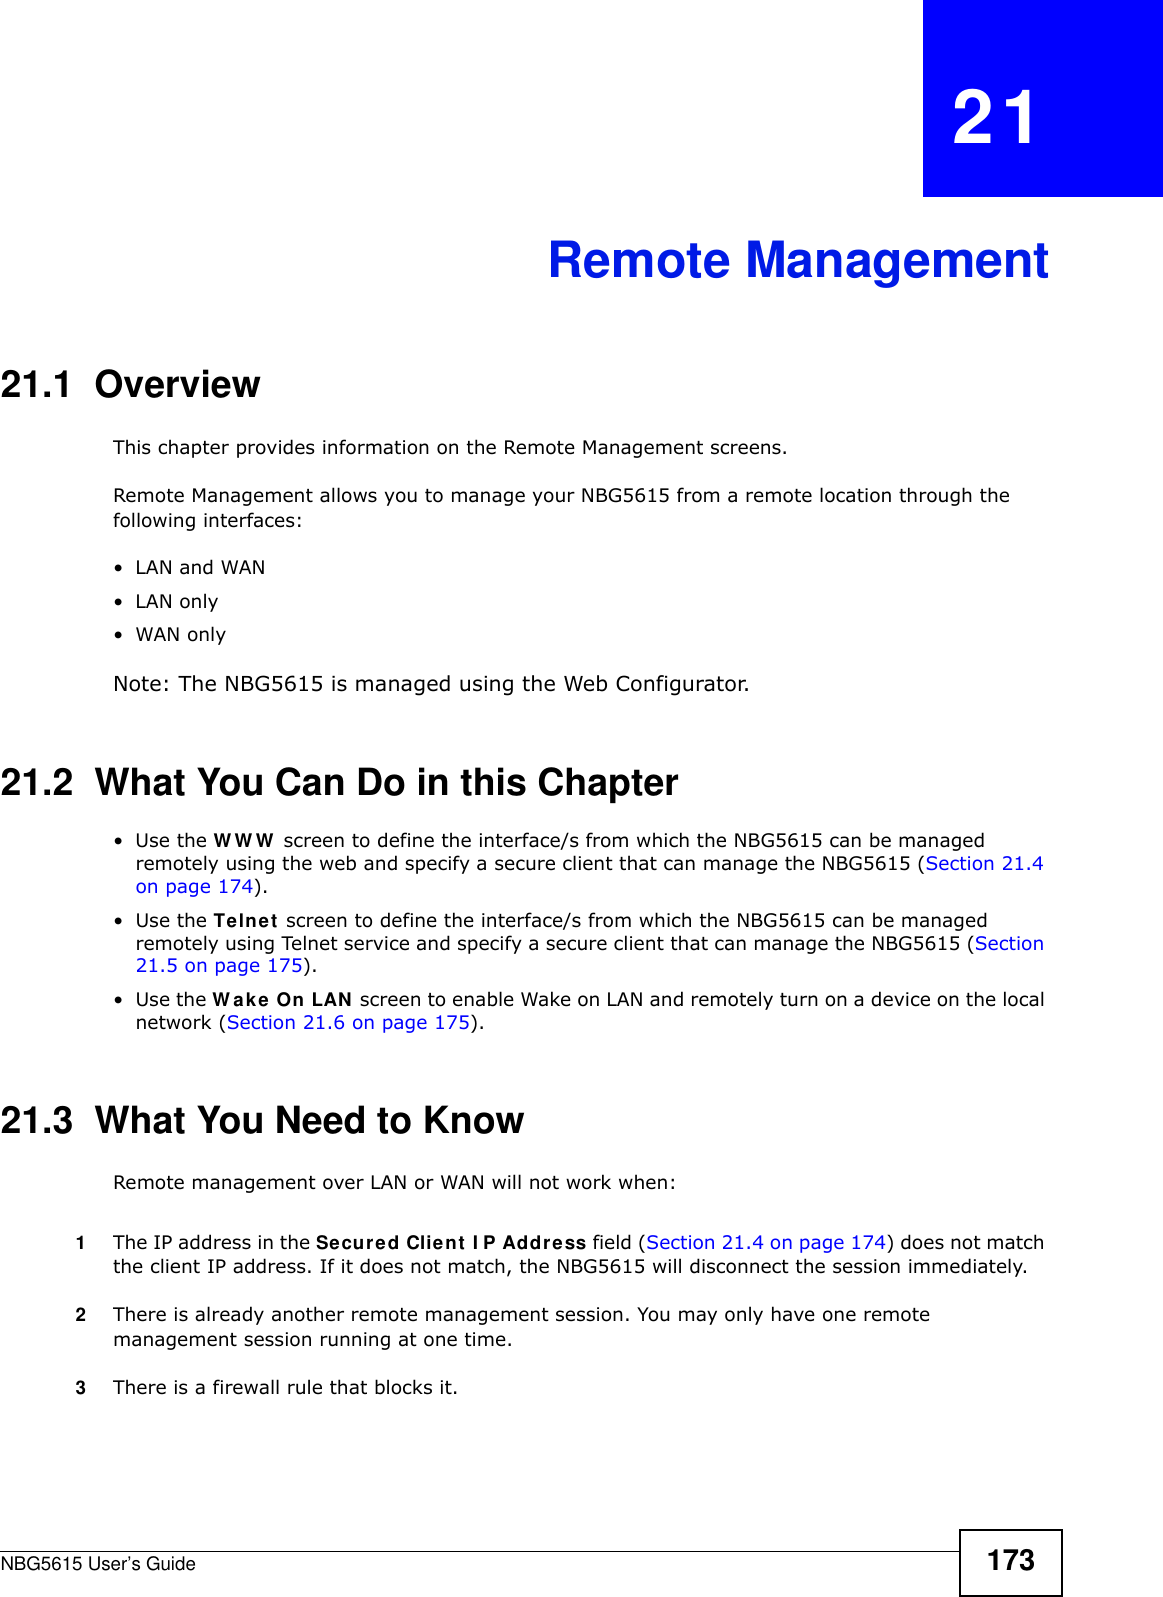 NBG5615 User’s Guide 173CHAPTER   21Remote Management21.1  OverviewThis chapter provides information on the Remote Management screens. Remote Management allows you to manage your NBG5615 from a remote location through the following interfaces:•LAN and WAN•LAN only•WAN onlyNote: The NBG5615 is managed using the Web Configurator.21.2  What You Can Do in this Chapter•Use the WWW screen to define the interface/s from which the NBG5615 can be managed remotely using the web and specify a secure client that can manage the NBG5615 (Section 21.4 on page 174).•Use the Telnet screen to define the interface/s from which the NBG5615 can be managed remotely using Telnet service and specify a secure client that can manage the NBG5615 (Section 21.5 on page 175).•Use the W ake On LAN screen to enable Wake on LAN and remotely turn on a device on the local network (Section 21.6 on page 175).21.3  What You Need to KnowRemote management over LAN or WAN will not work when:1The IP address in the Secured Client I P Address field (Section 21.4 on page 174) does not match the client IP address. If it does not match, the NBG5615 will disconnect the session immediately.2There is already another remote management session. You may only have one remote management session running at one time.3There is a firewall rule that blocks it.